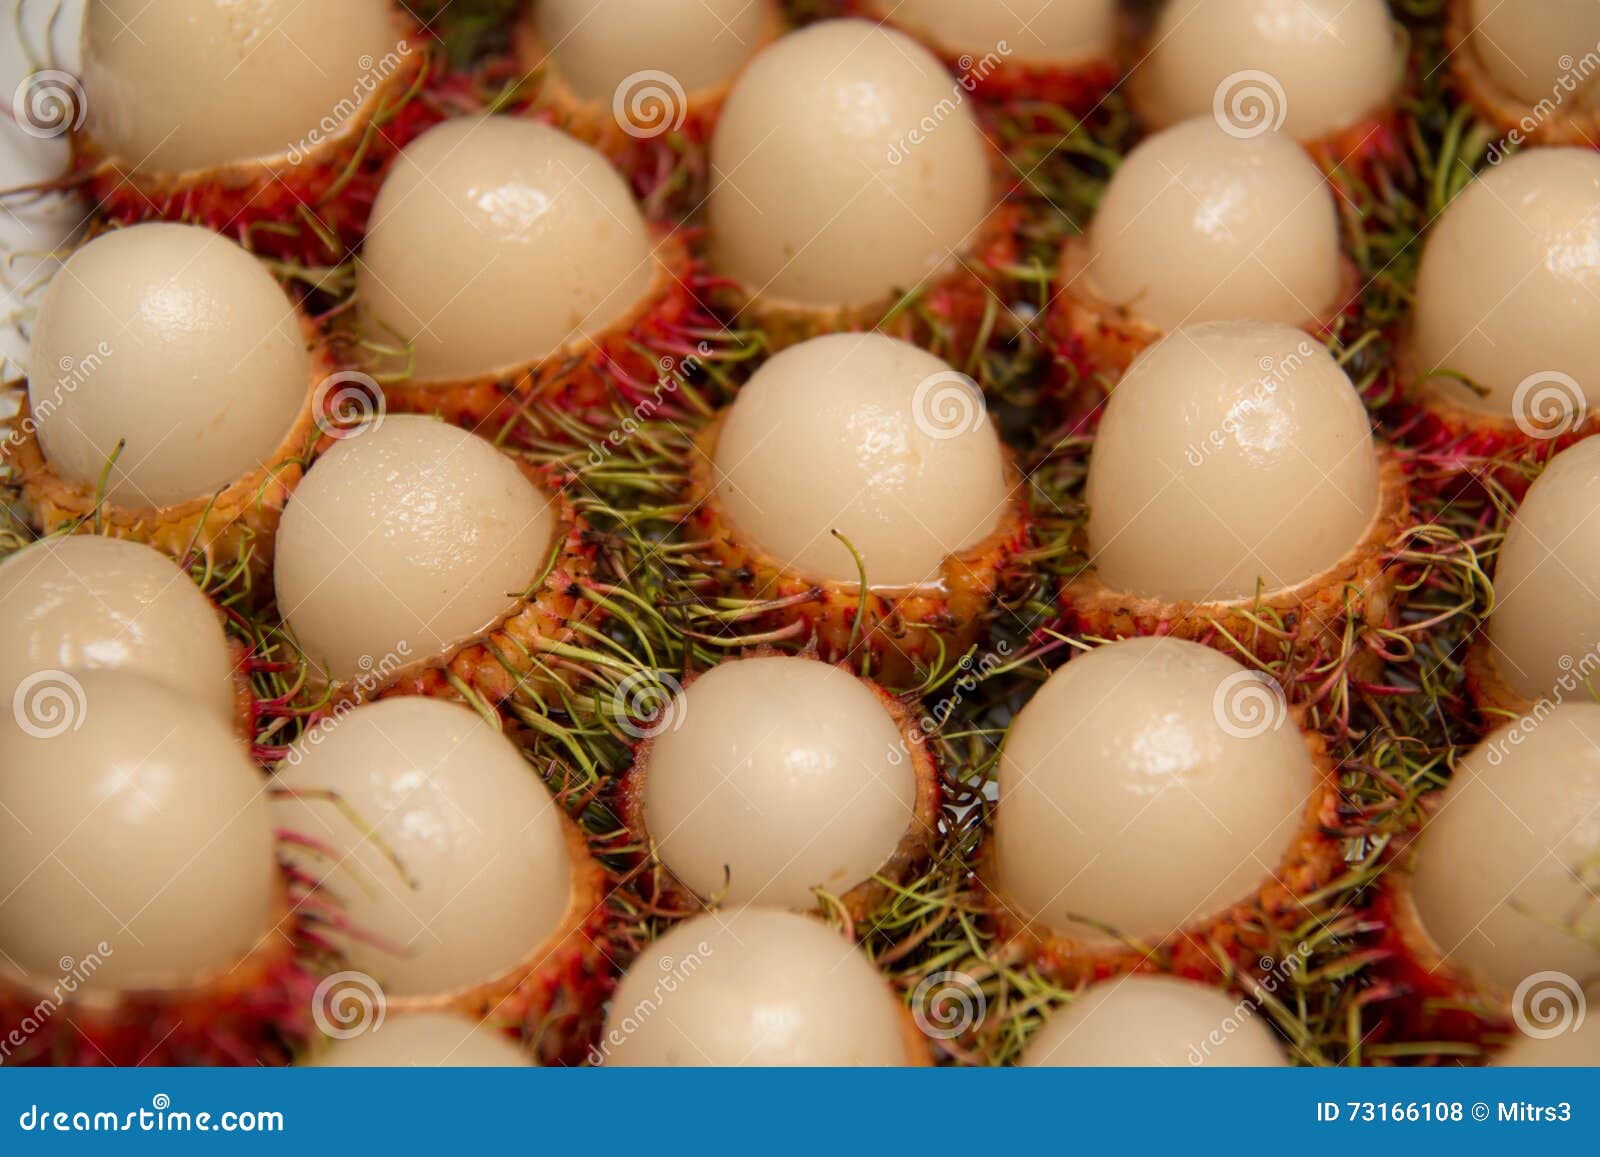 rambutan is a colorful and spiky tropical fruit stock photo